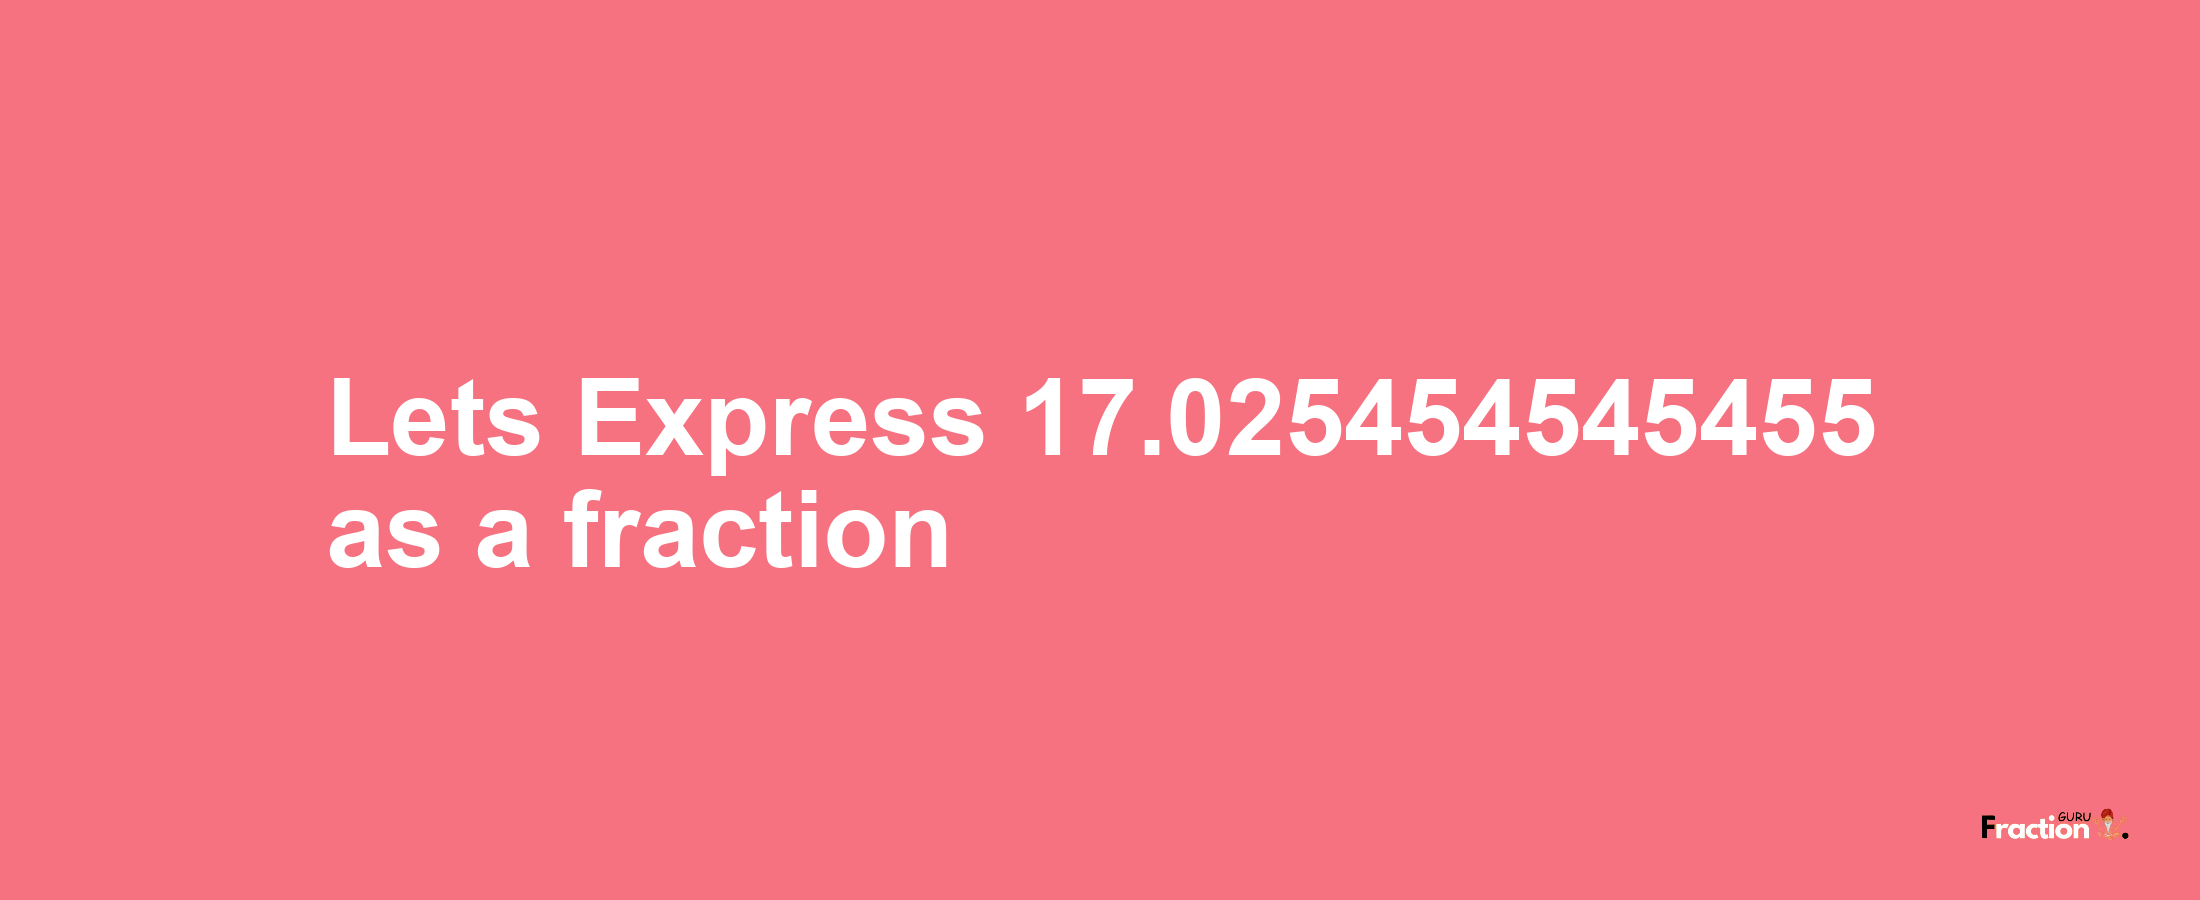 Lets Express 17.025454545455 as afraction